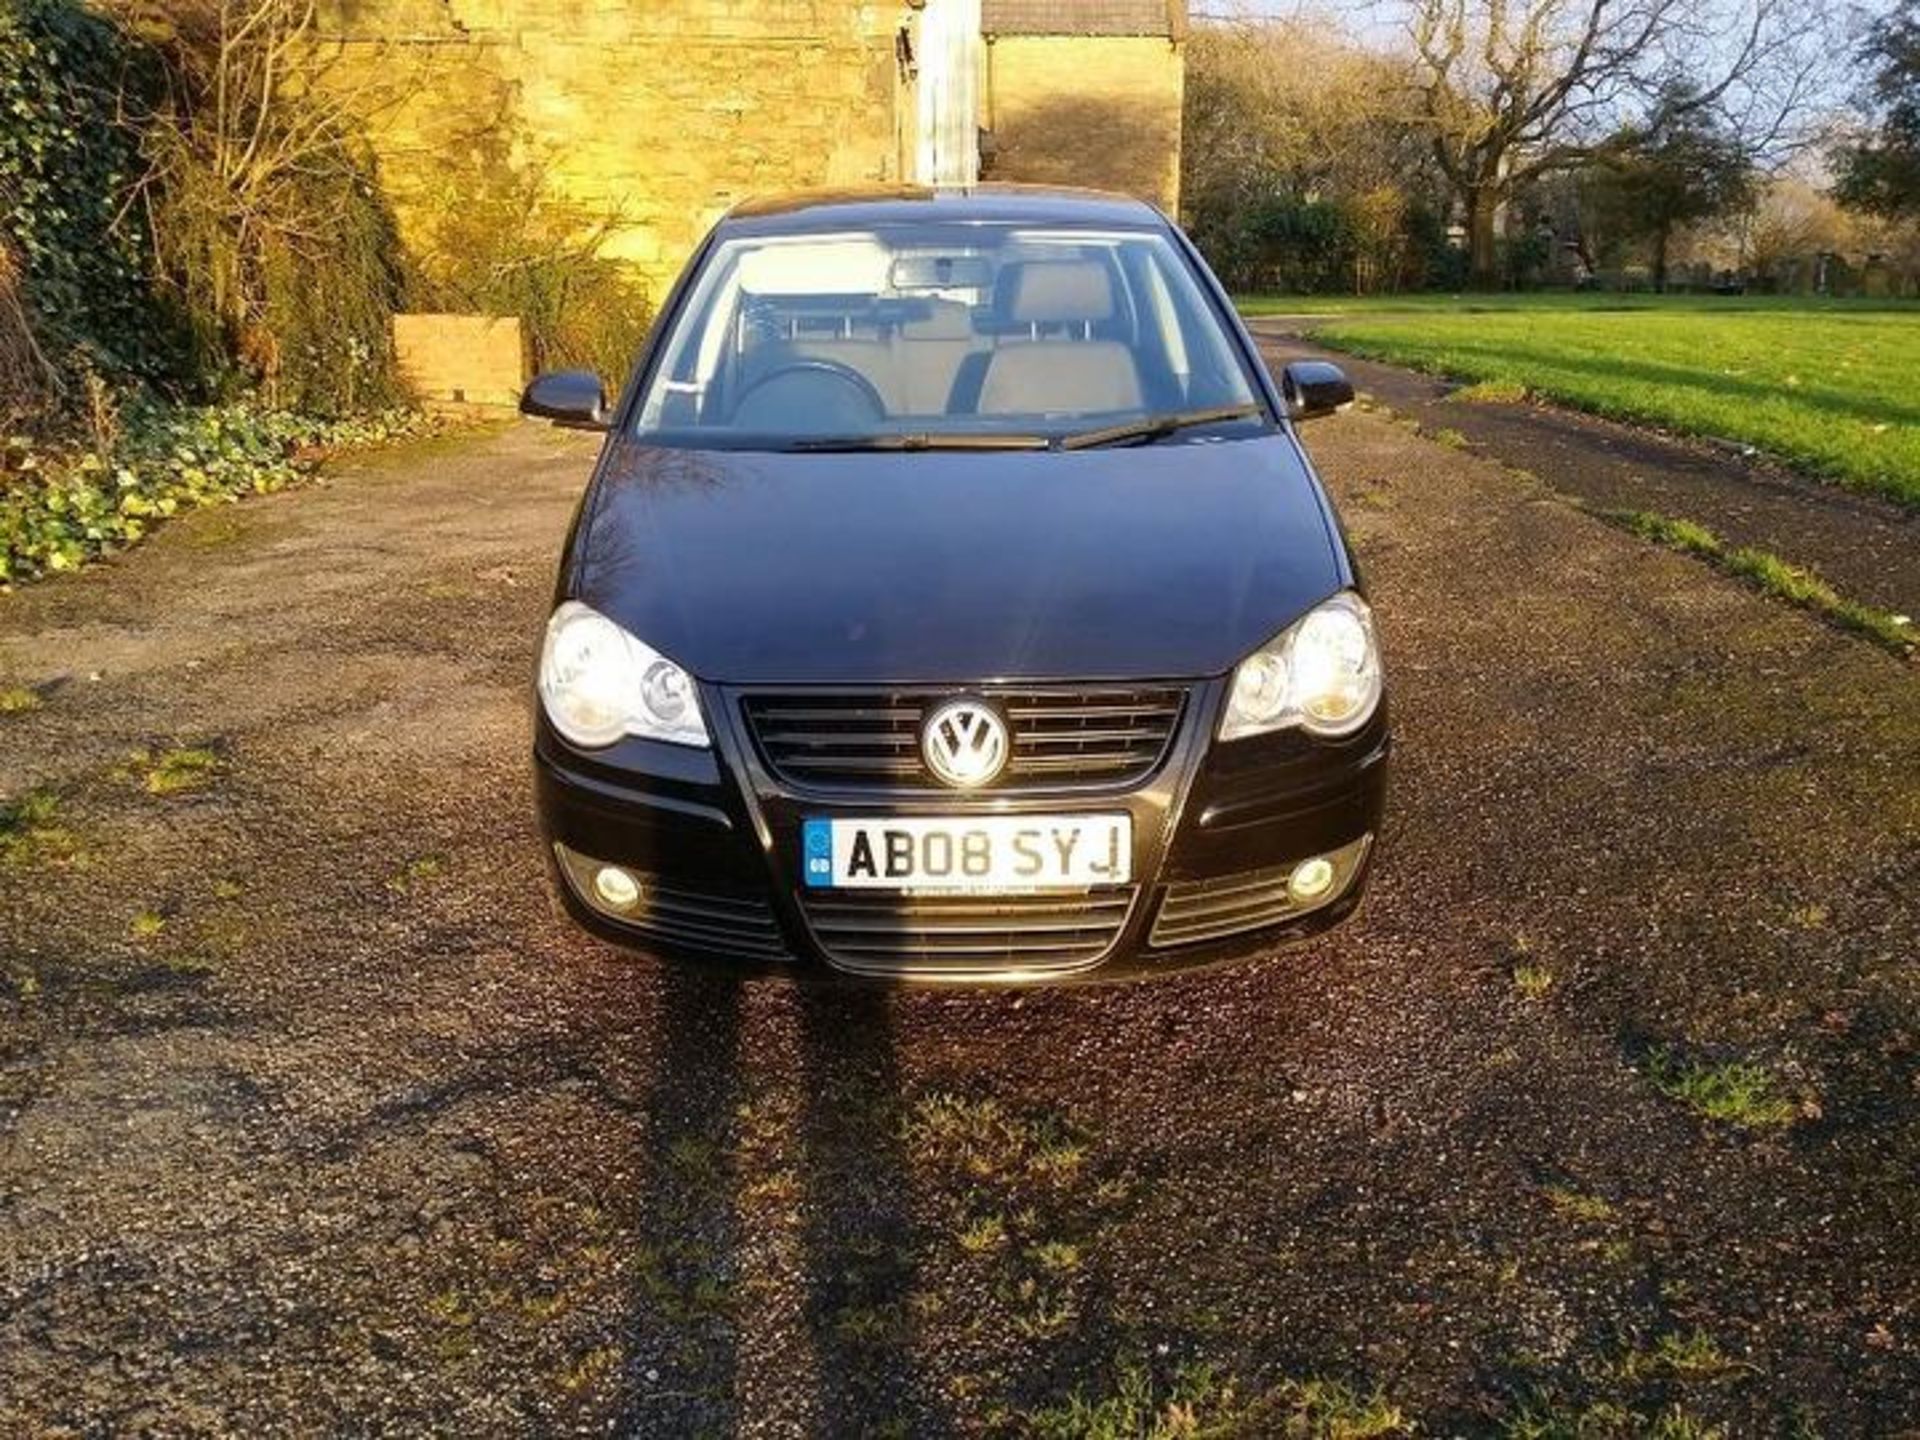 VOLKSWAGEN, POLO 1-2 MATCH, AB08 SYJ, 1-2 LTR, PETROL, MANUAL, 4 DOOR HATCH, 06.06.2008, CURRENT